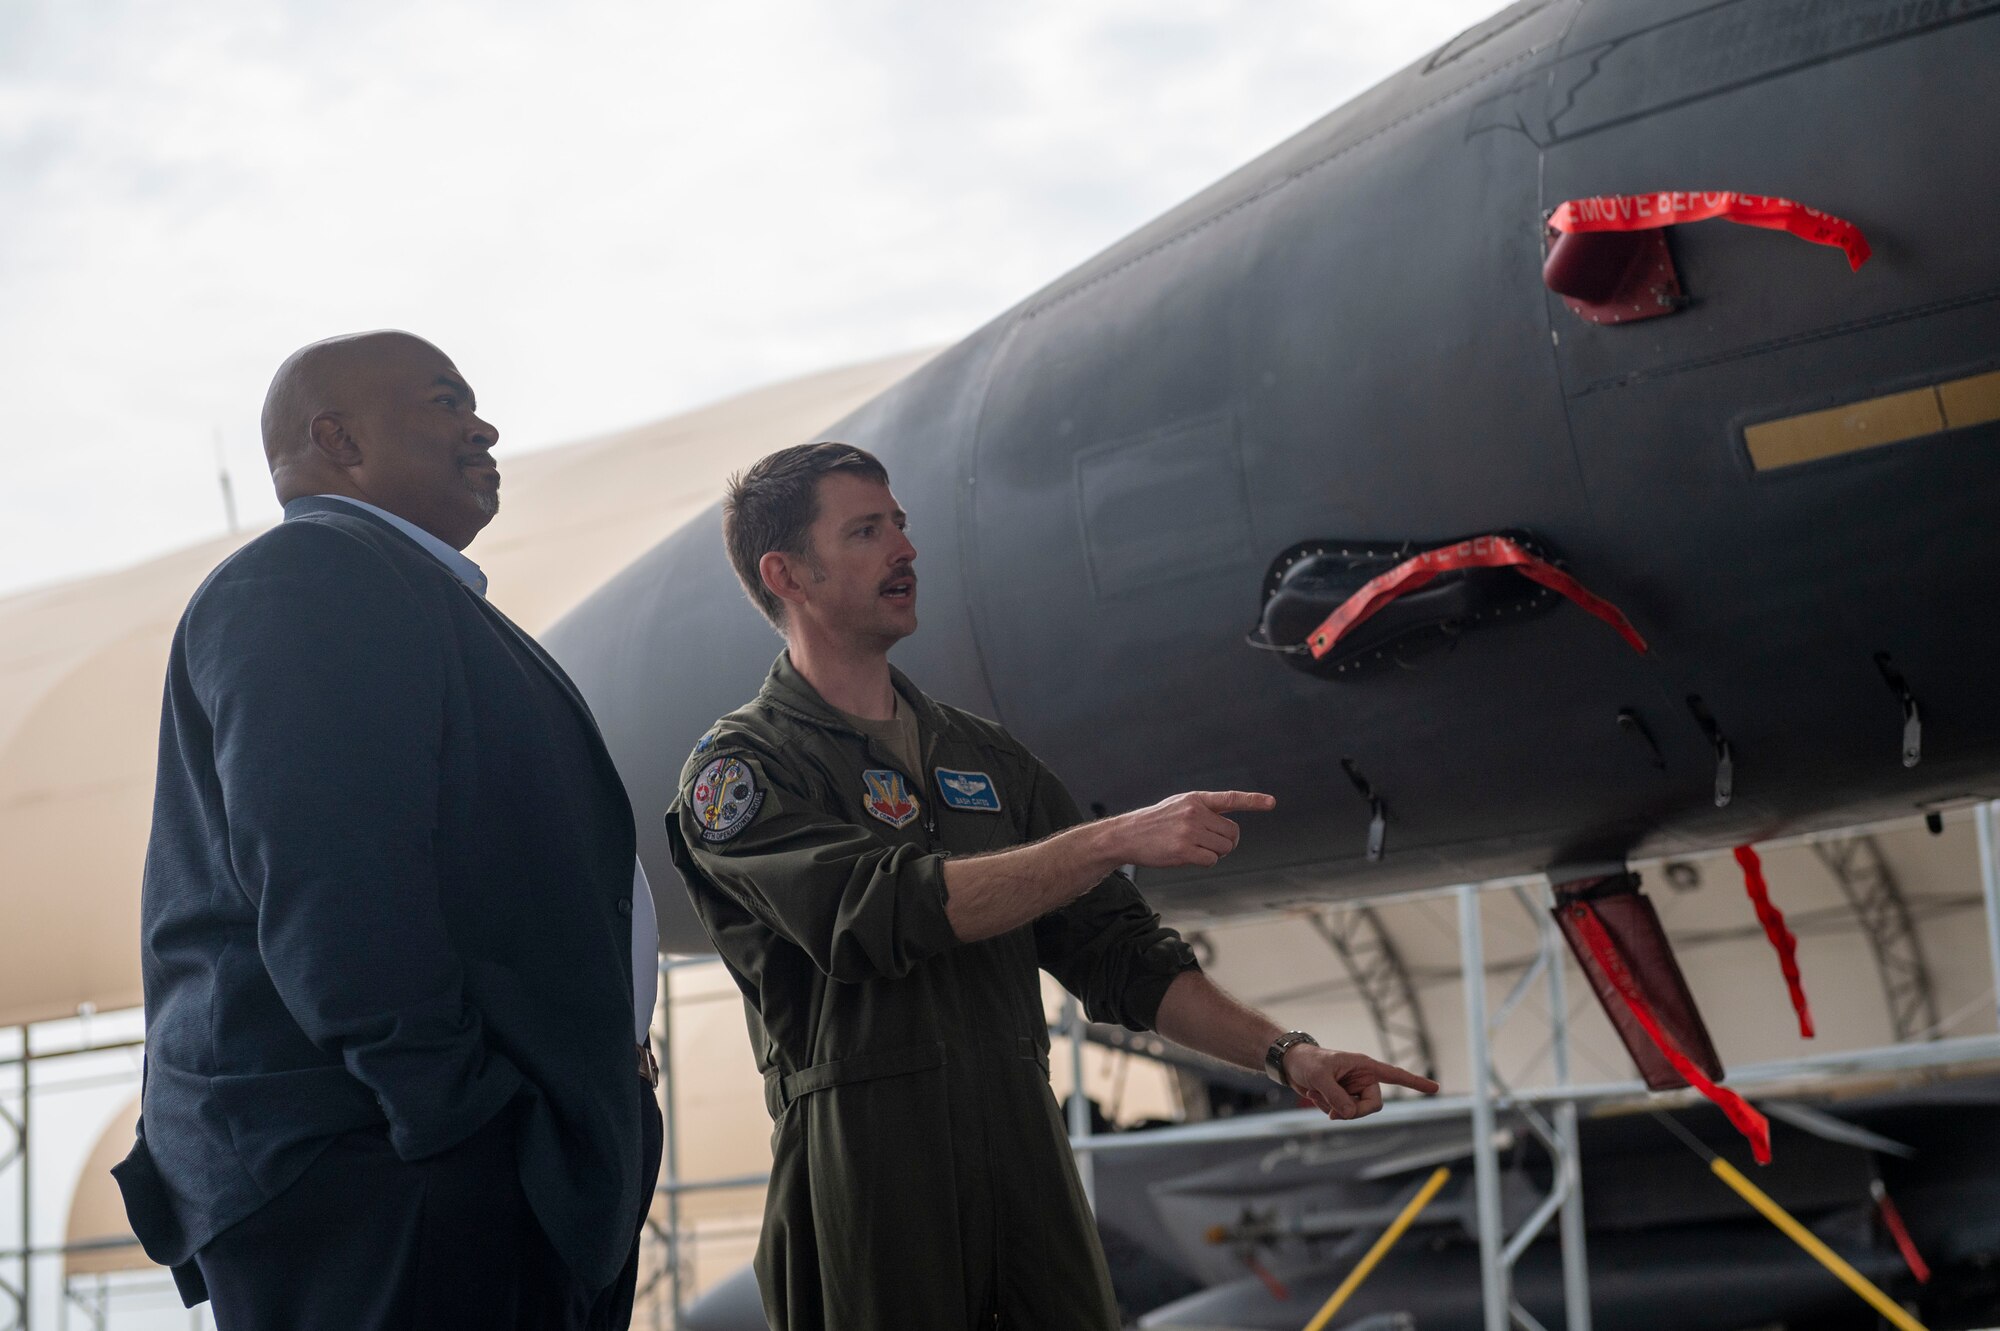 Lt. Col. Joshua Cates, Deputy Commander of the 4th Operations Group, and Mark Robinson, North Carolina Lt. Gov., tour the flightline at Seymour Johnson Air Force Base, North Carolina, March 23, 2022. Robinson was elected as the 35th Lt. Gov. of North Carolina in 2021. (U.S. Air Force photo by Senior Airman Kevin Holloway)